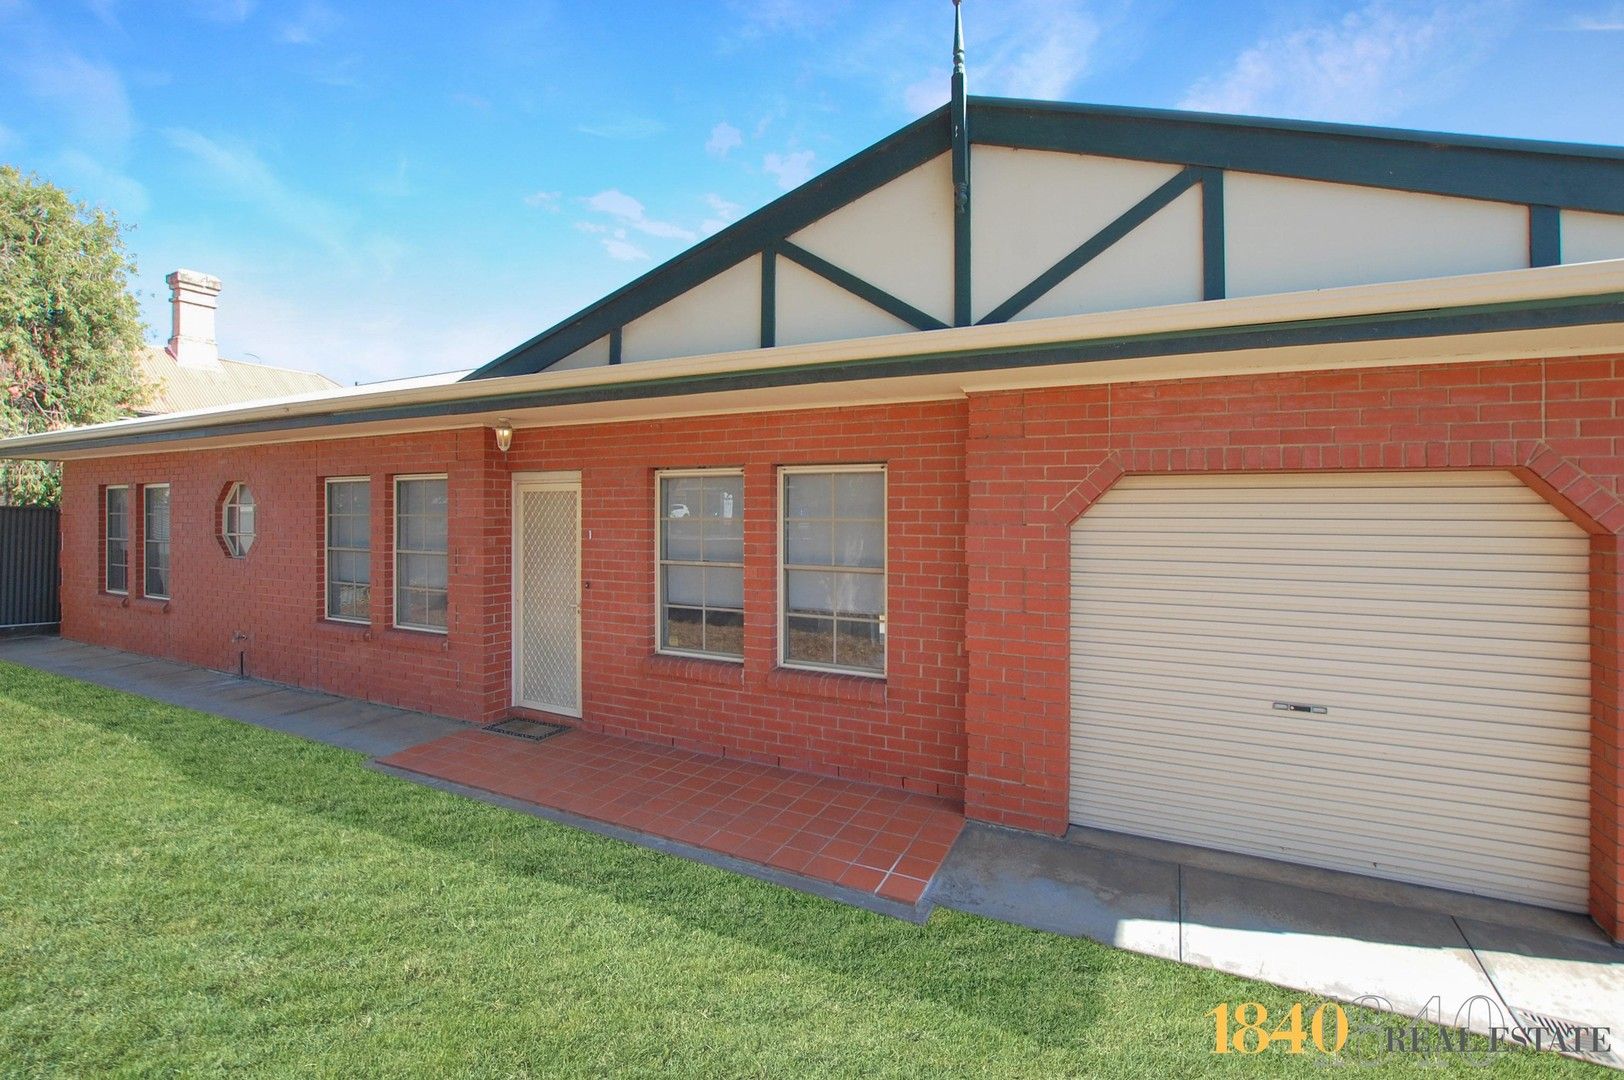 1/585 Lower North East Road, Campbelltown SA 5074, Image 0